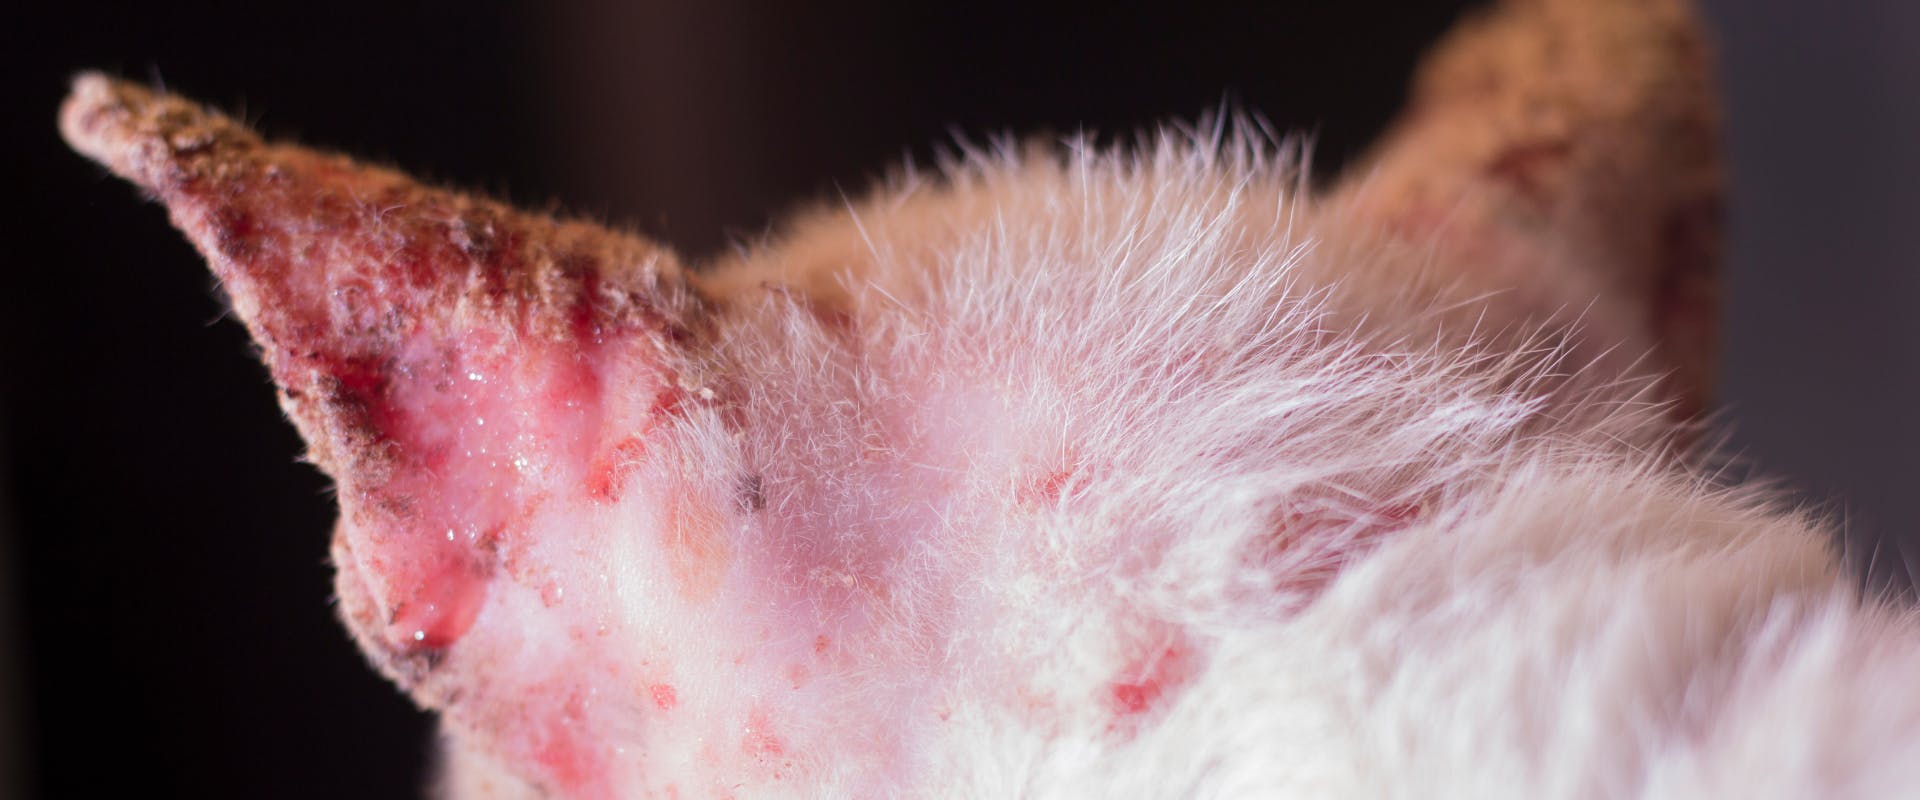 a close up of mange in cats on a white cat's ear